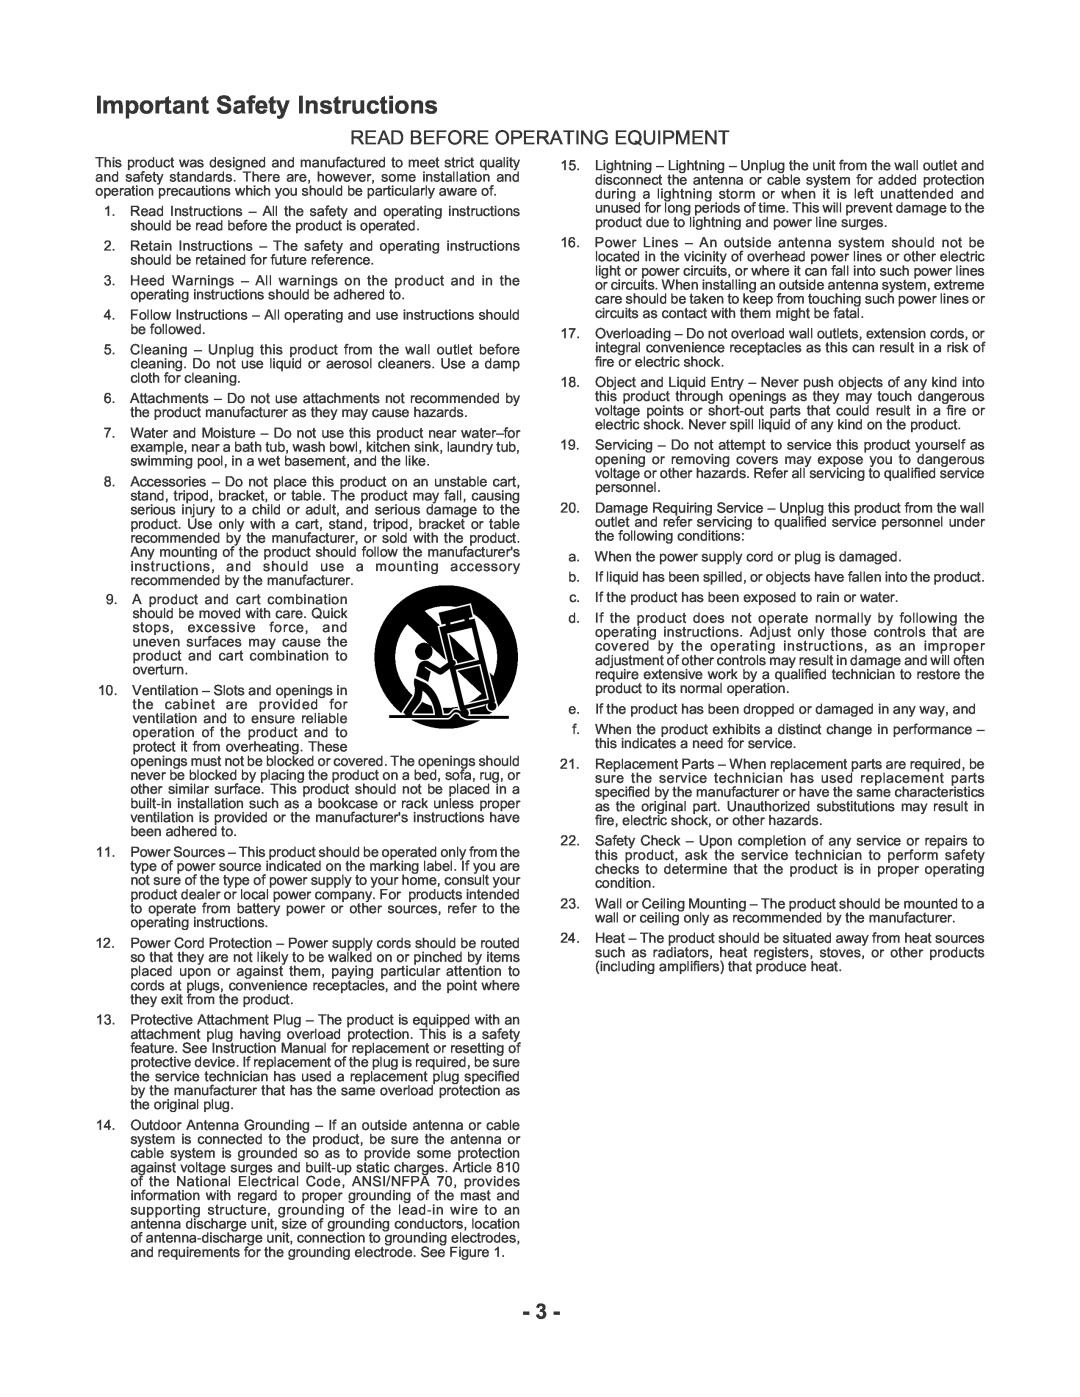 Marantz PMD670 manual Important Safety Instructions, Read Before Operating Equipment 